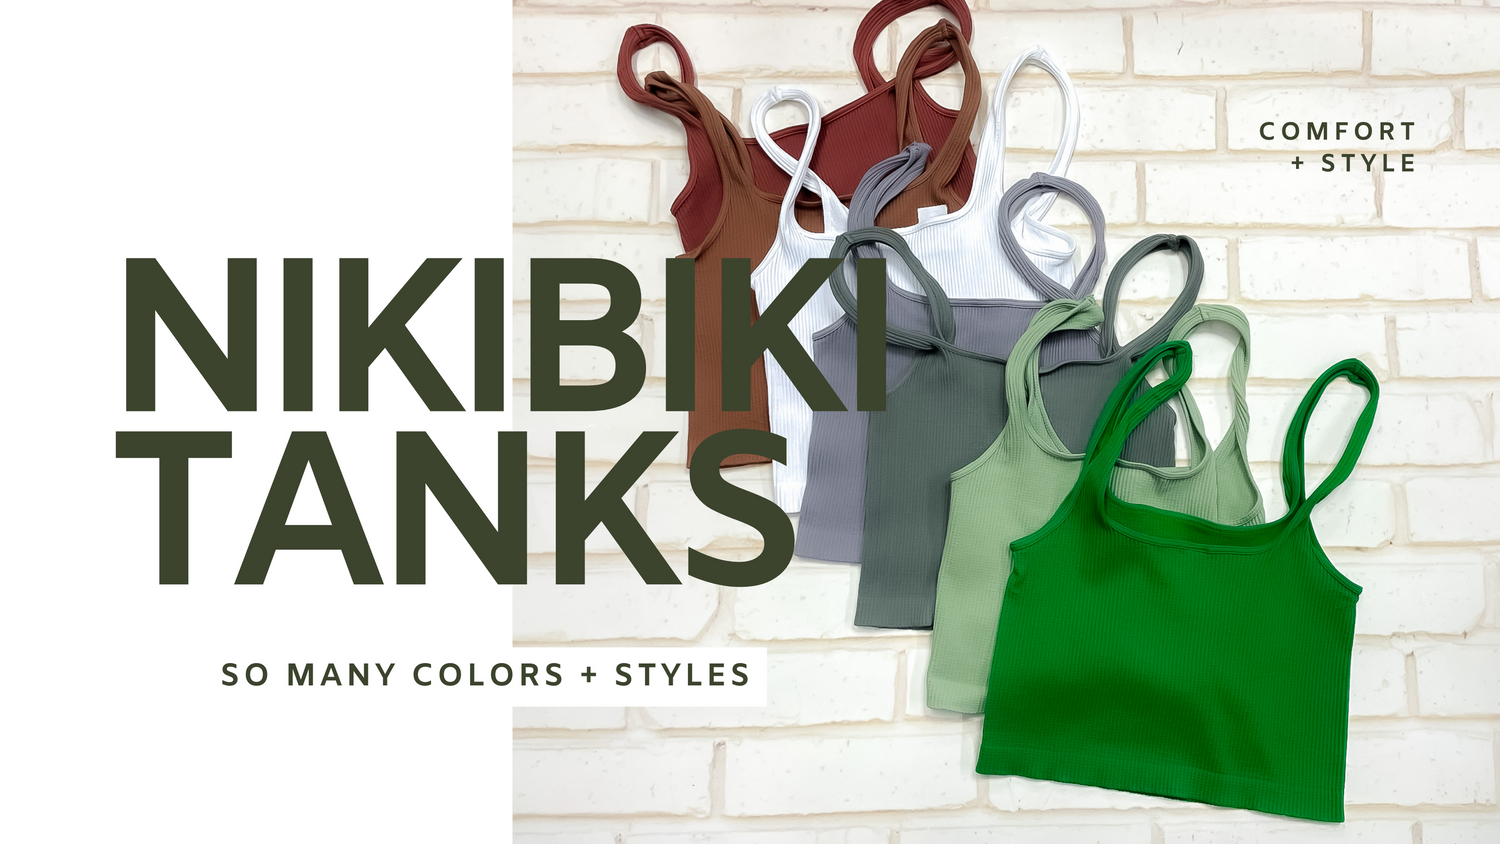 Nikibiki Tanks: The Perfect Combination of Comfort and Style